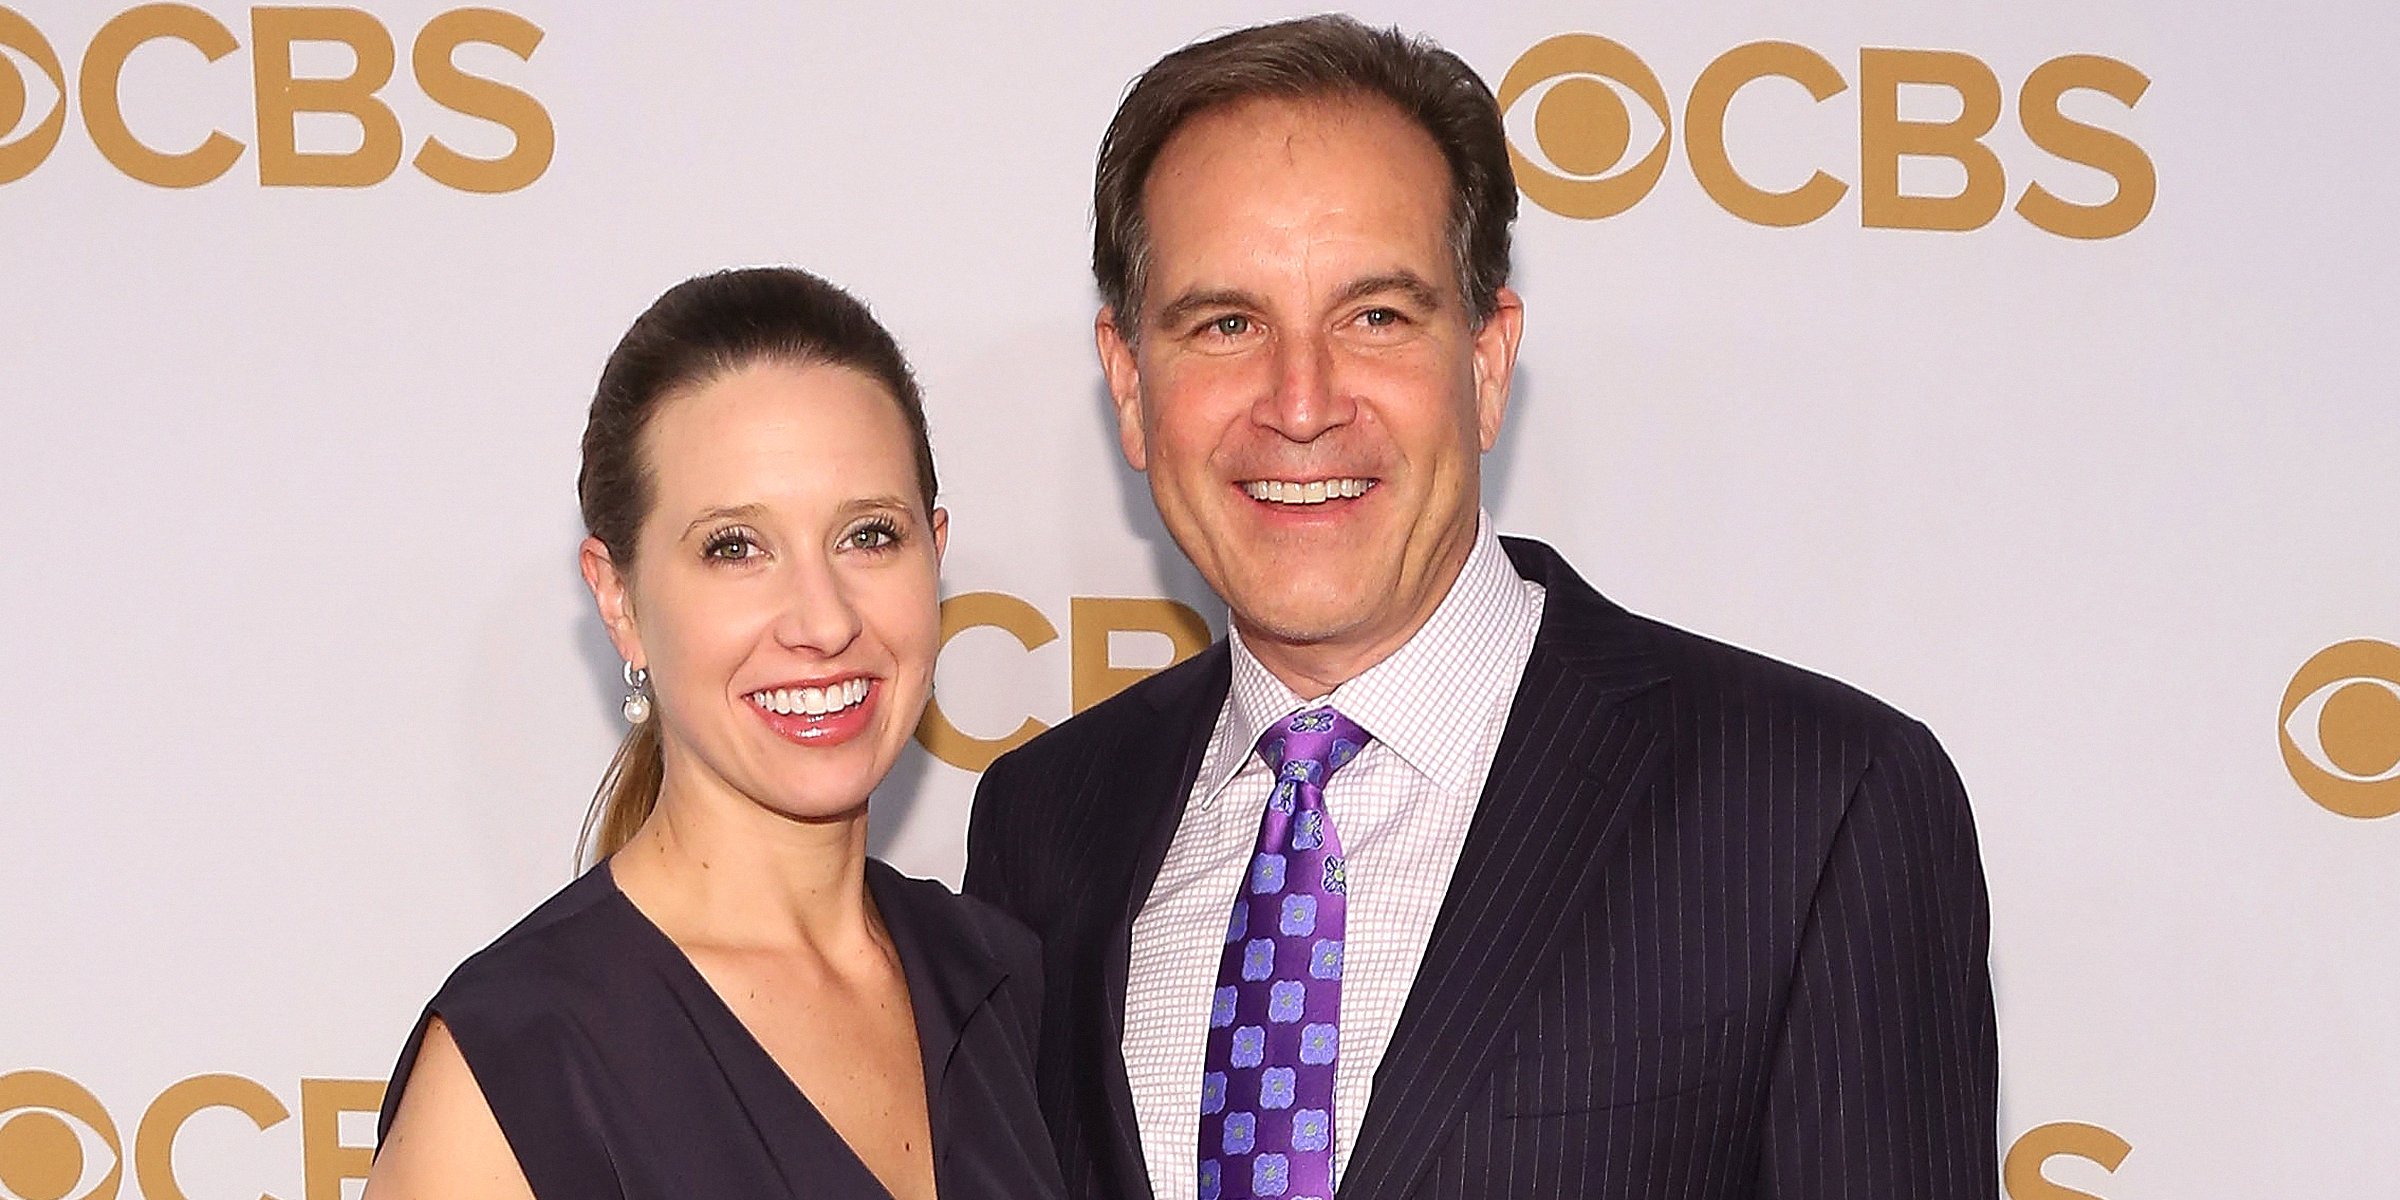 Jim Nantz and Courtney Richards | Source: Getty Images